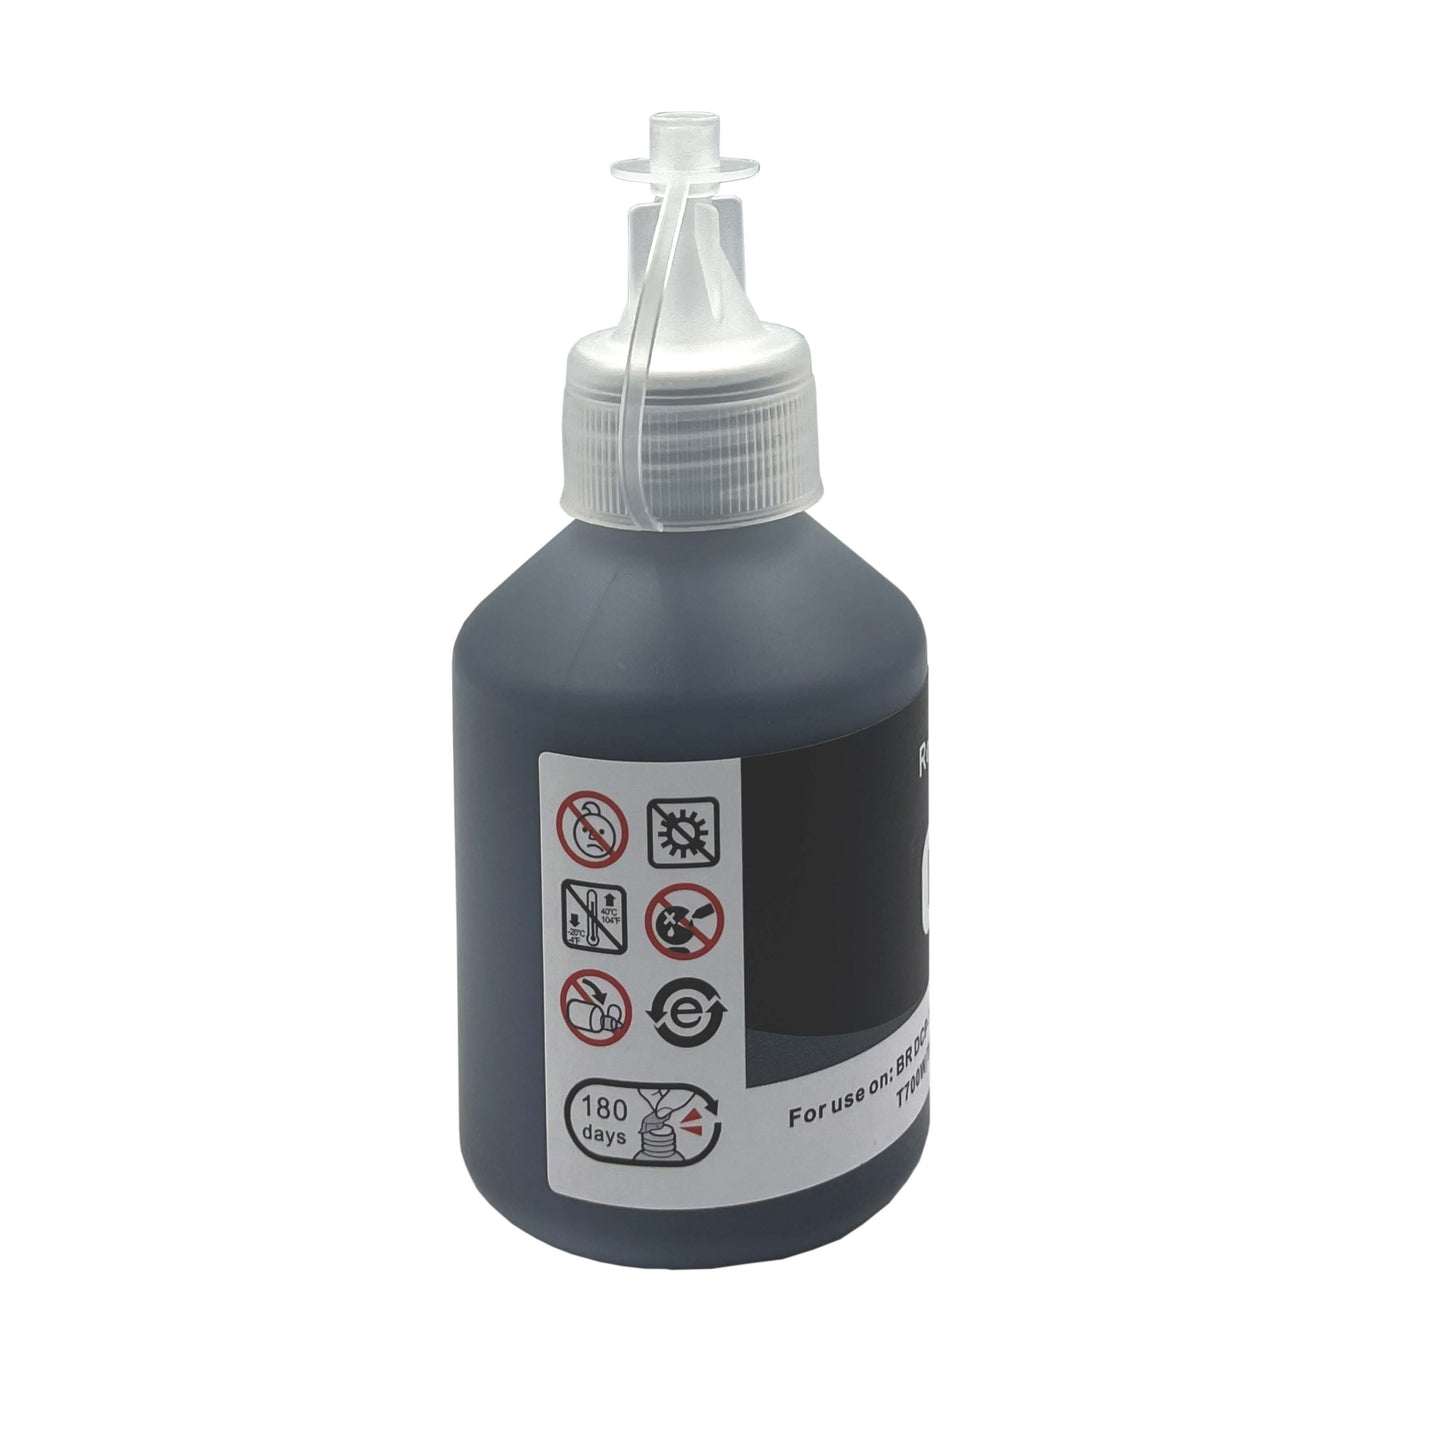 CRE8 | Compatible Brother Black Refill Bottle Ink 108ml